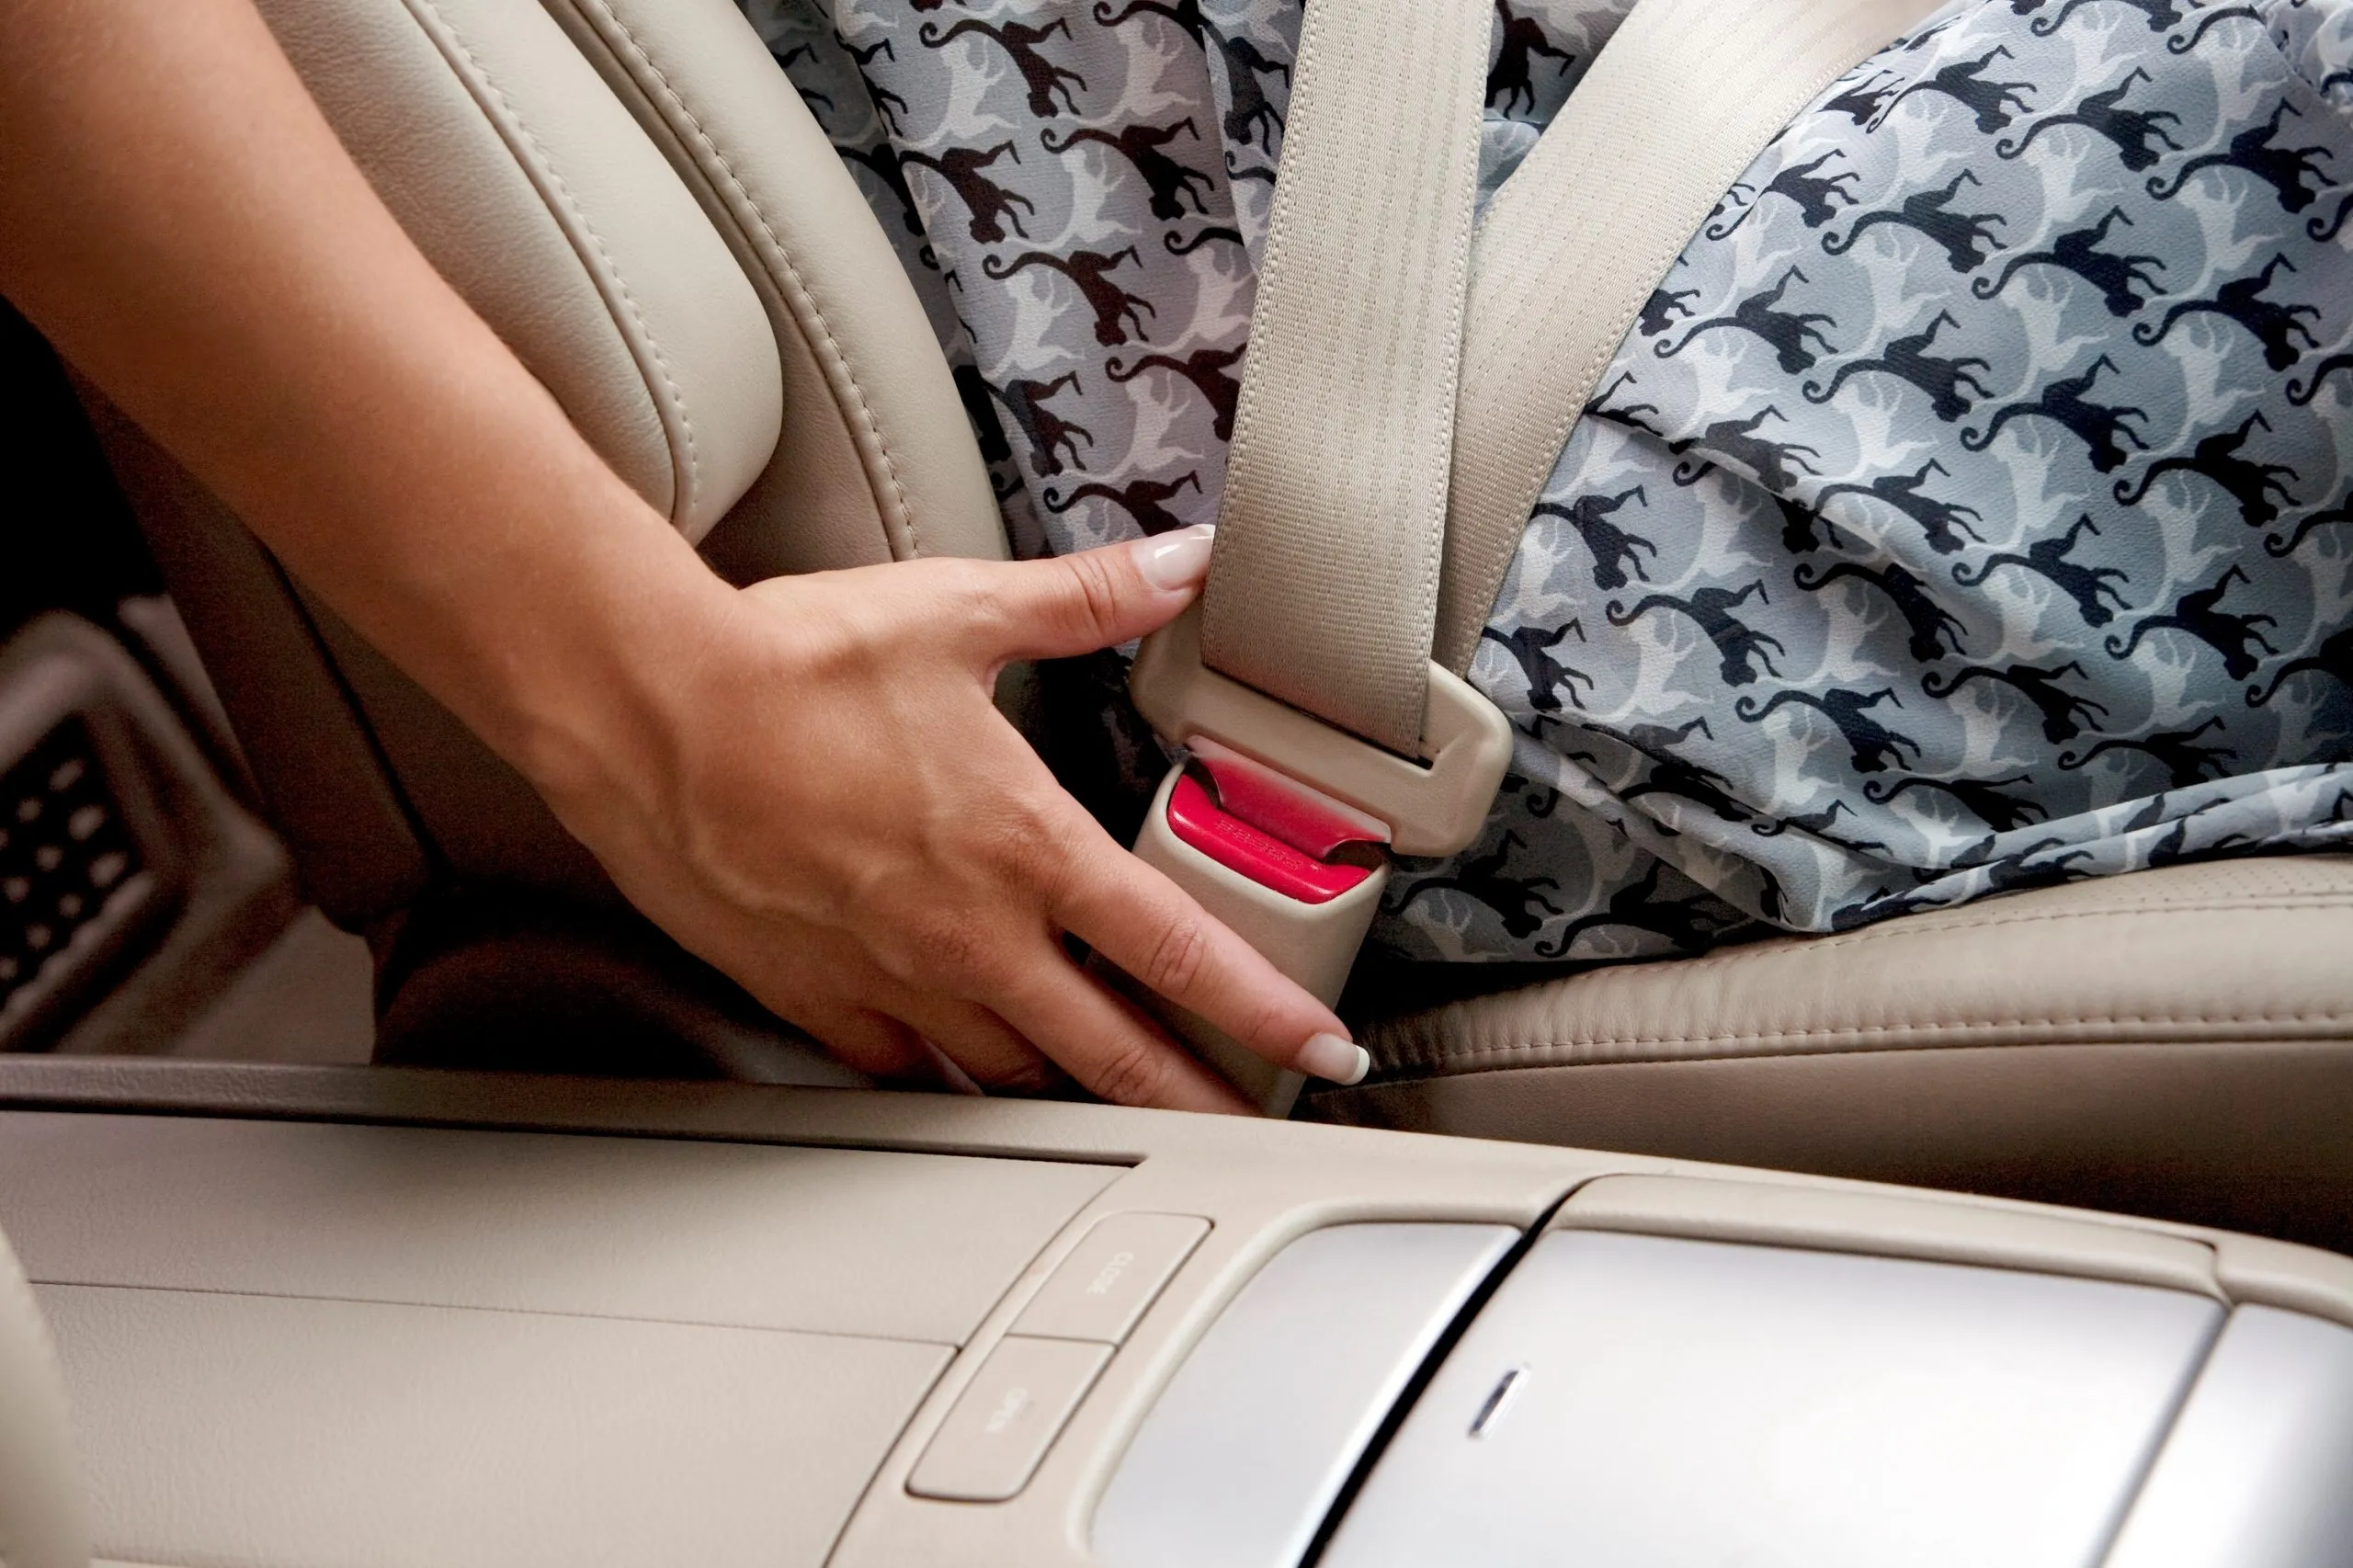 How to Safely Unlock a Stuck Seatbelt in Your Car